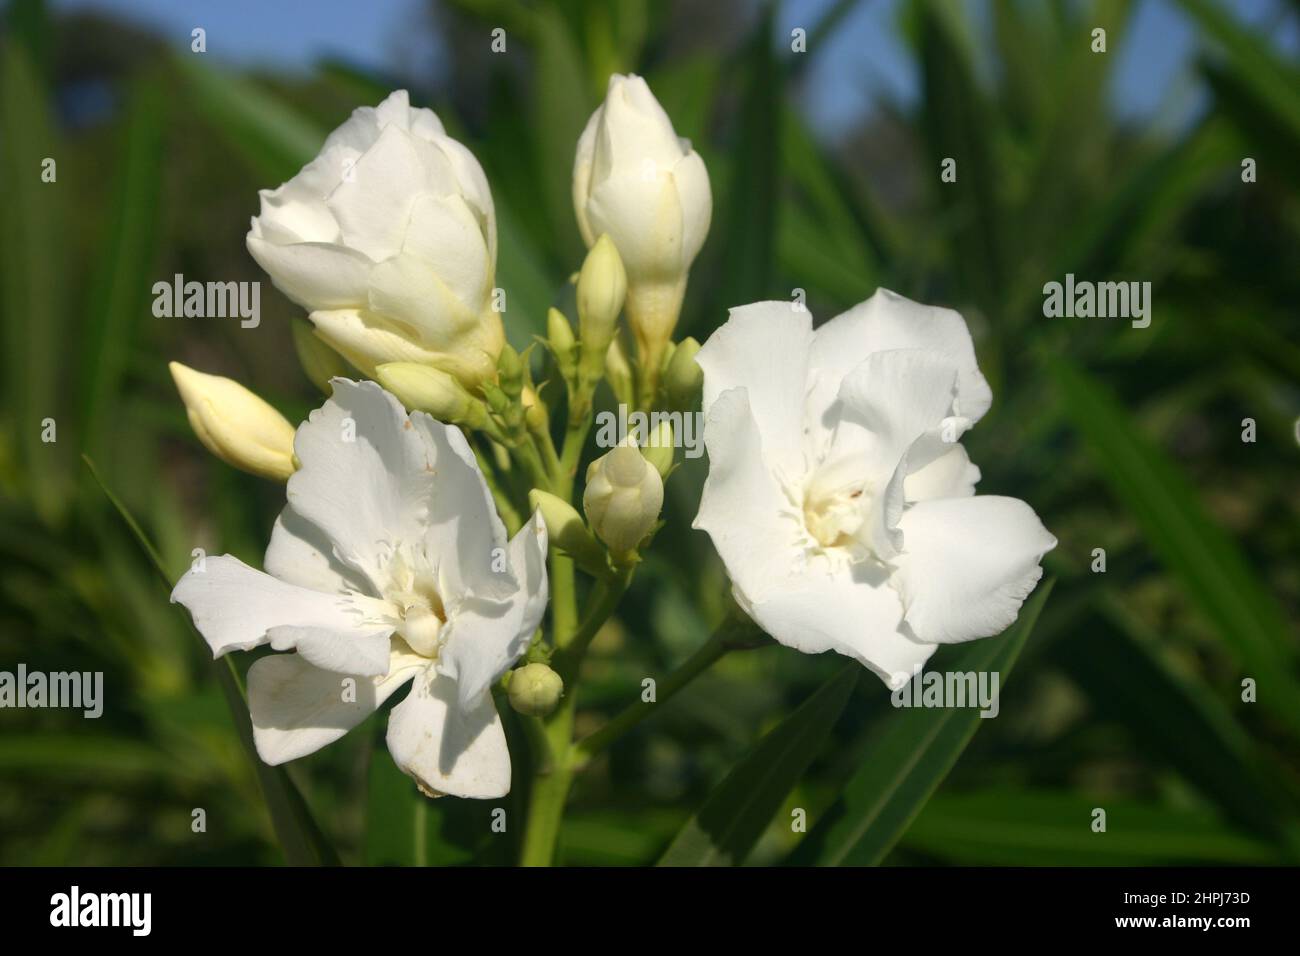 CLOSE-UP OF THE WHITE FLOWERS OF THE OLEANDER (NERIUM) BUSH. NERIUM CONTAINS SEVERAL TOXIC COMPOUNDS AND IS CONSIDERED A POISONOUS PLANT. Stock Photo